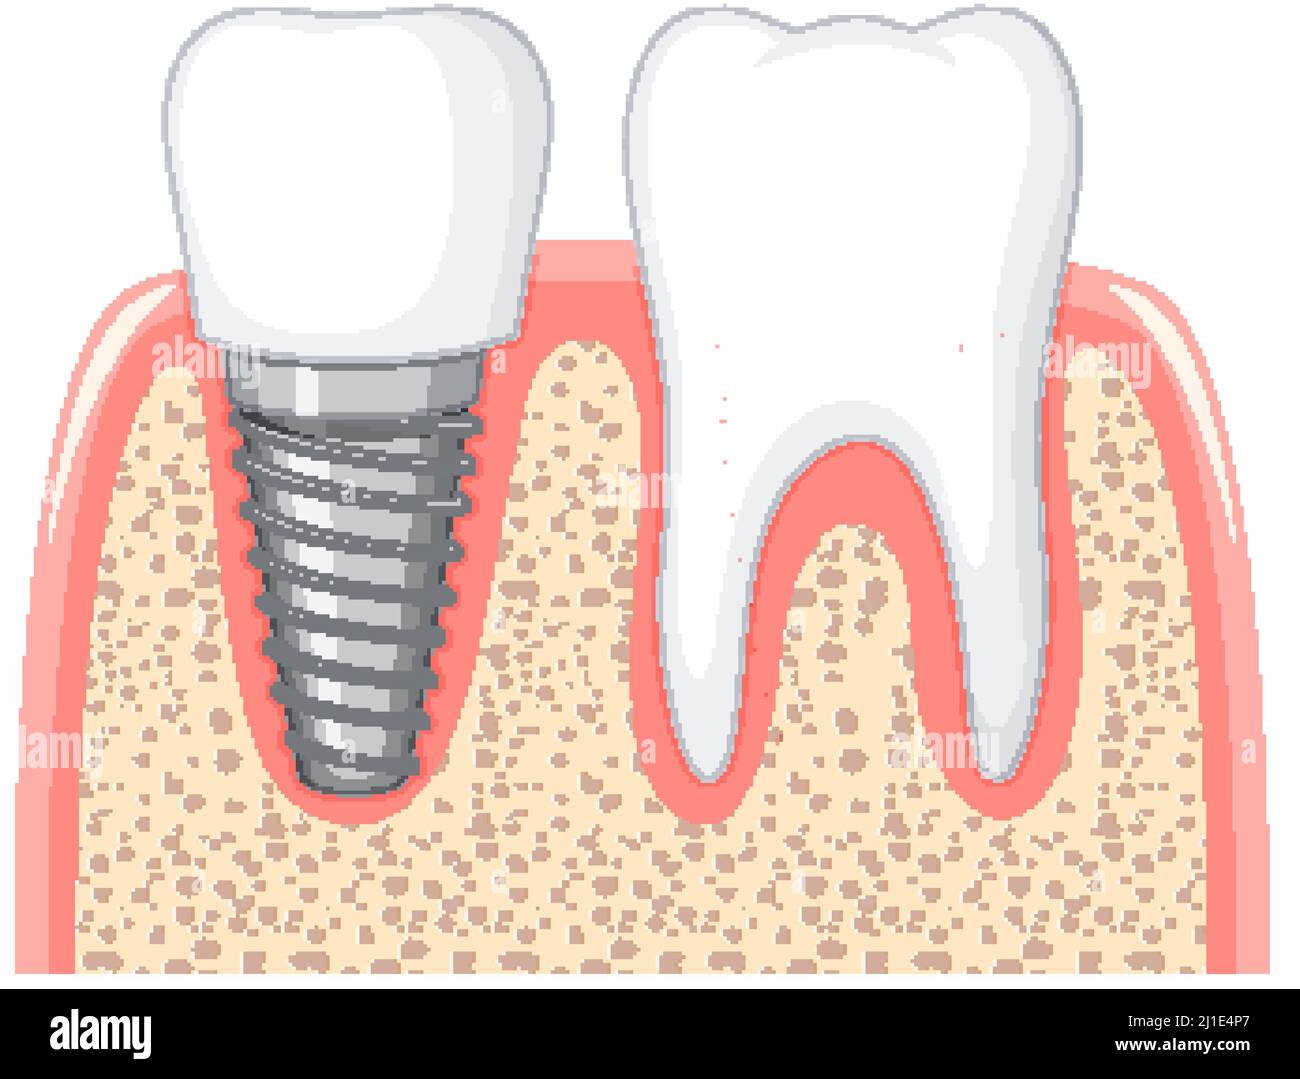 Heathy tooth and dental implant in gum on white background illustration Stock Vector